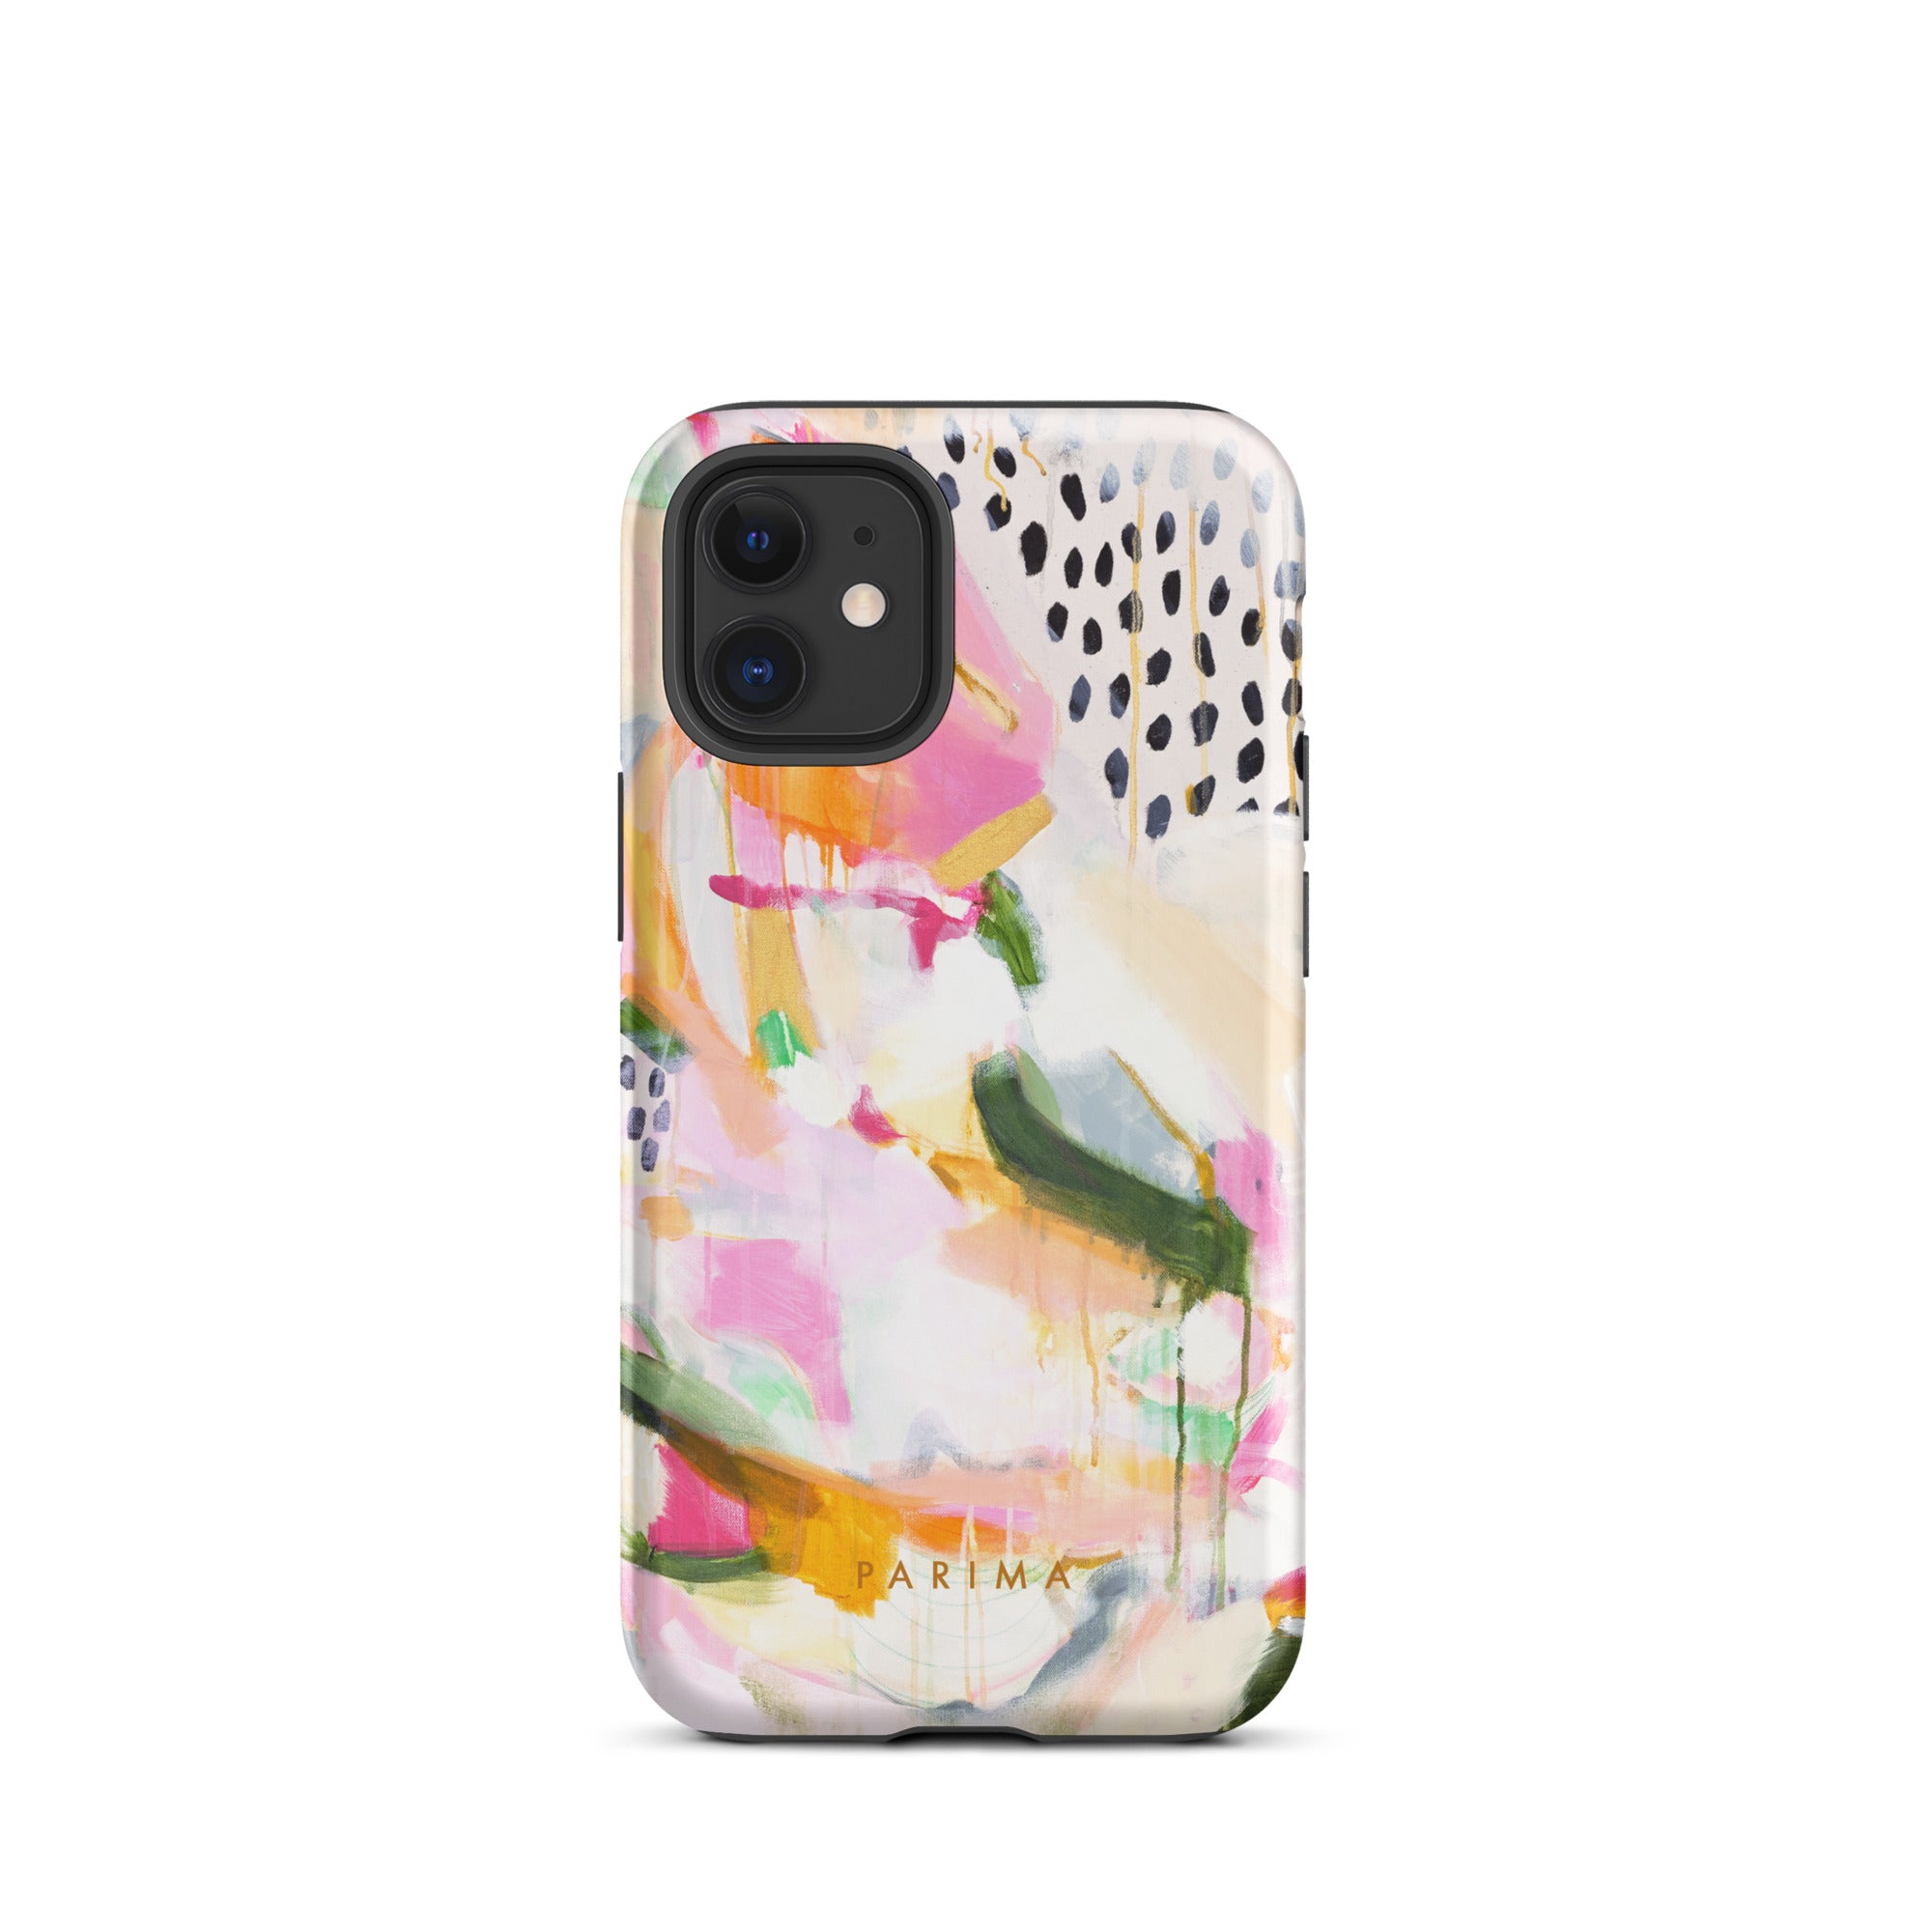 Adira, pink and green abstract art - iPhone 12 Mini tough case by Parima Studio